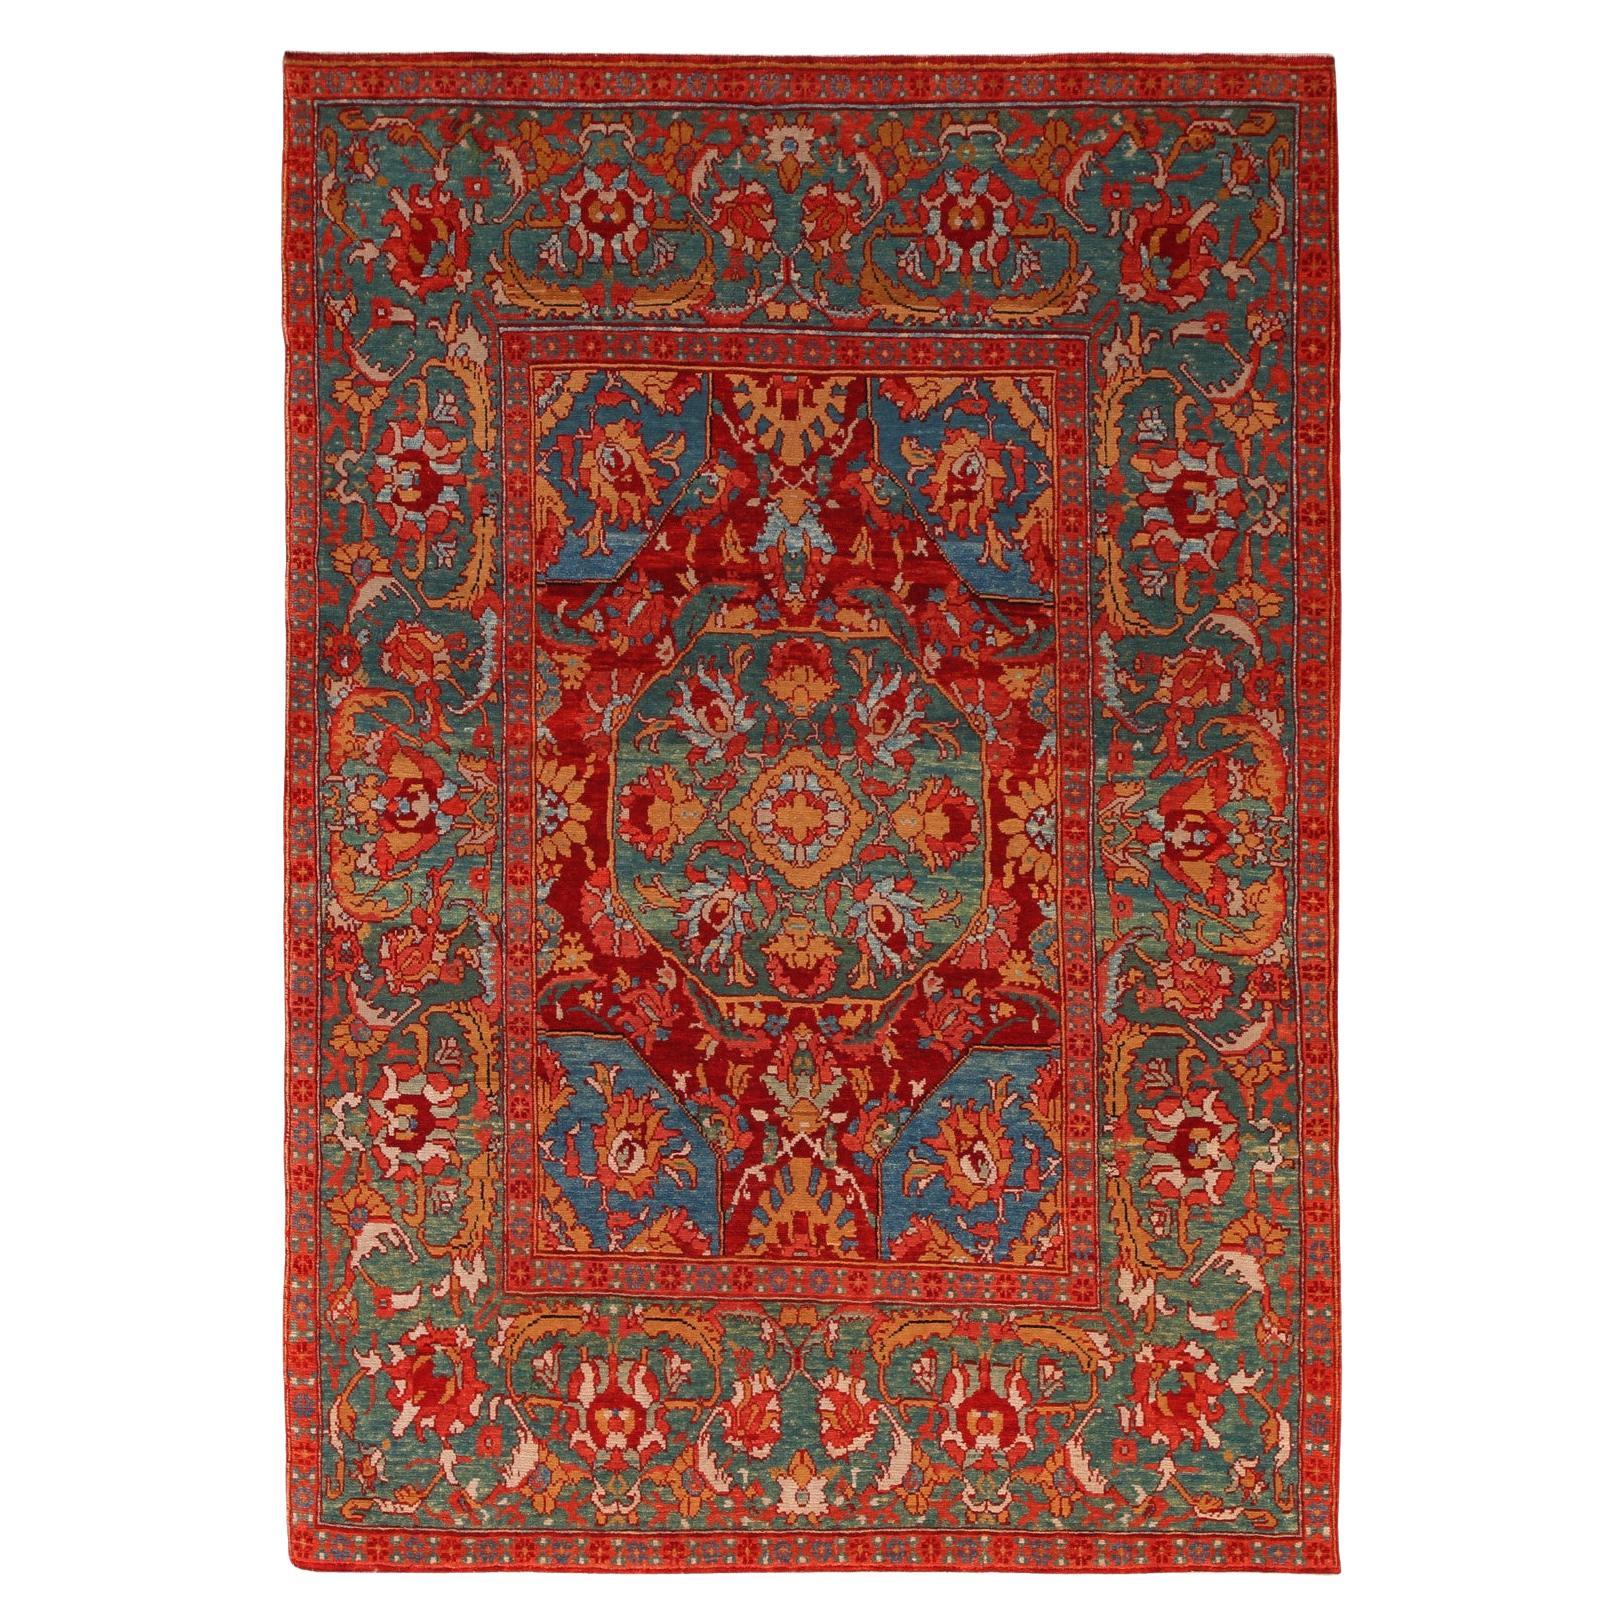 Ararat Rugs Cairene Ottoman Carpet 16th Century Antique Revival Rug Natural Dyed For Sale